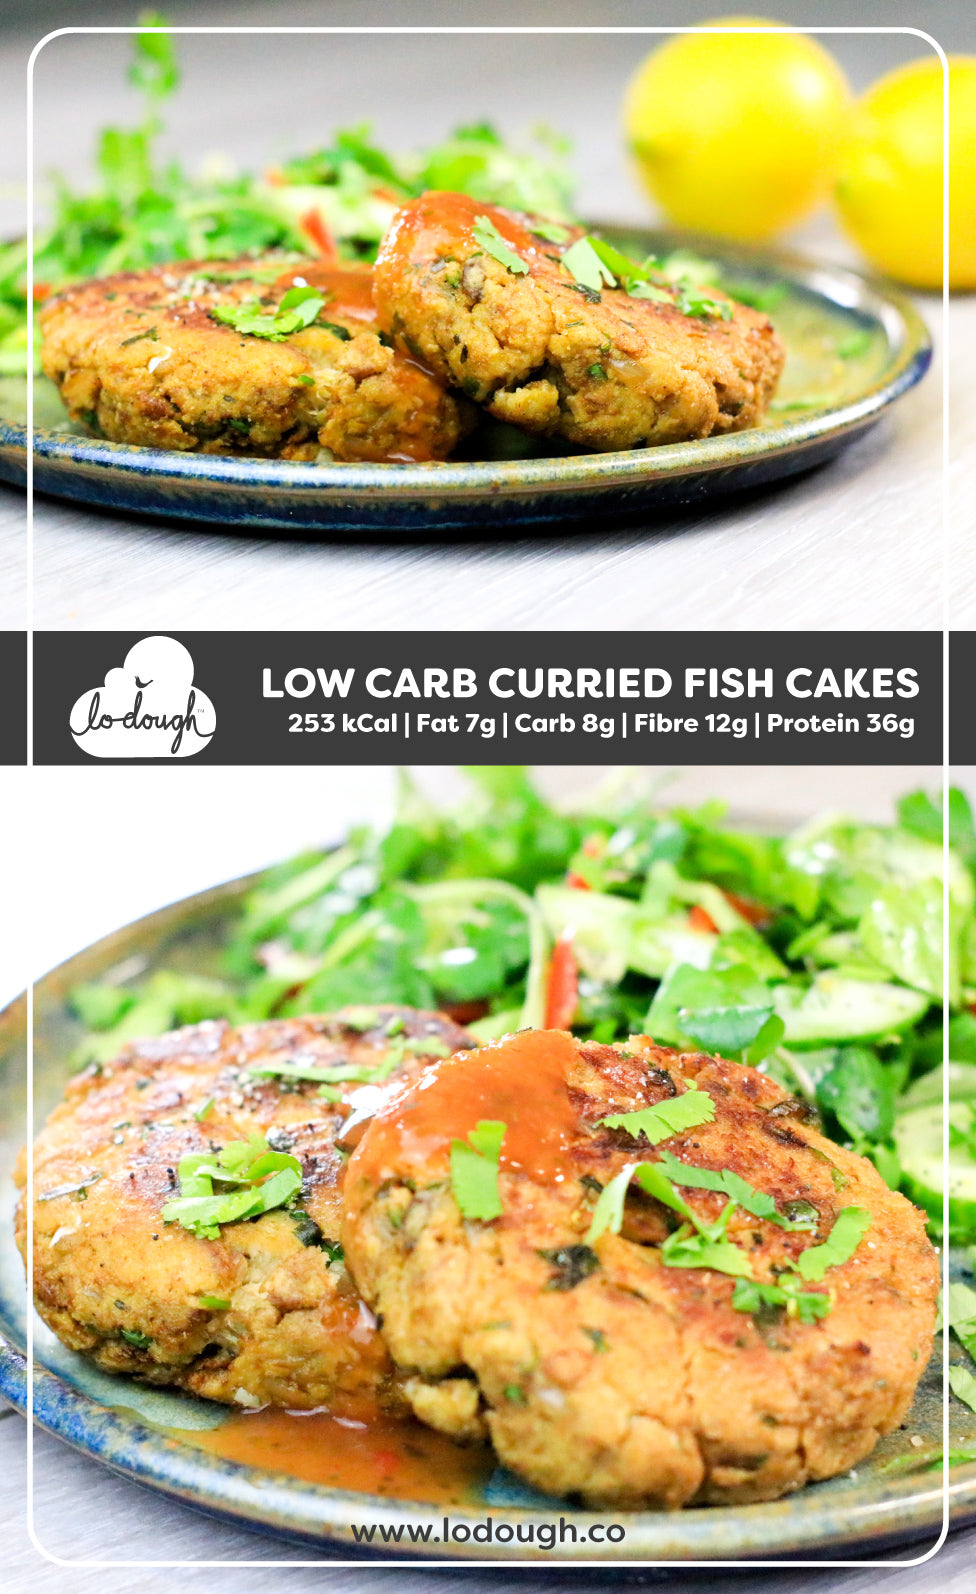 Low Carb Curried Fish Cakes